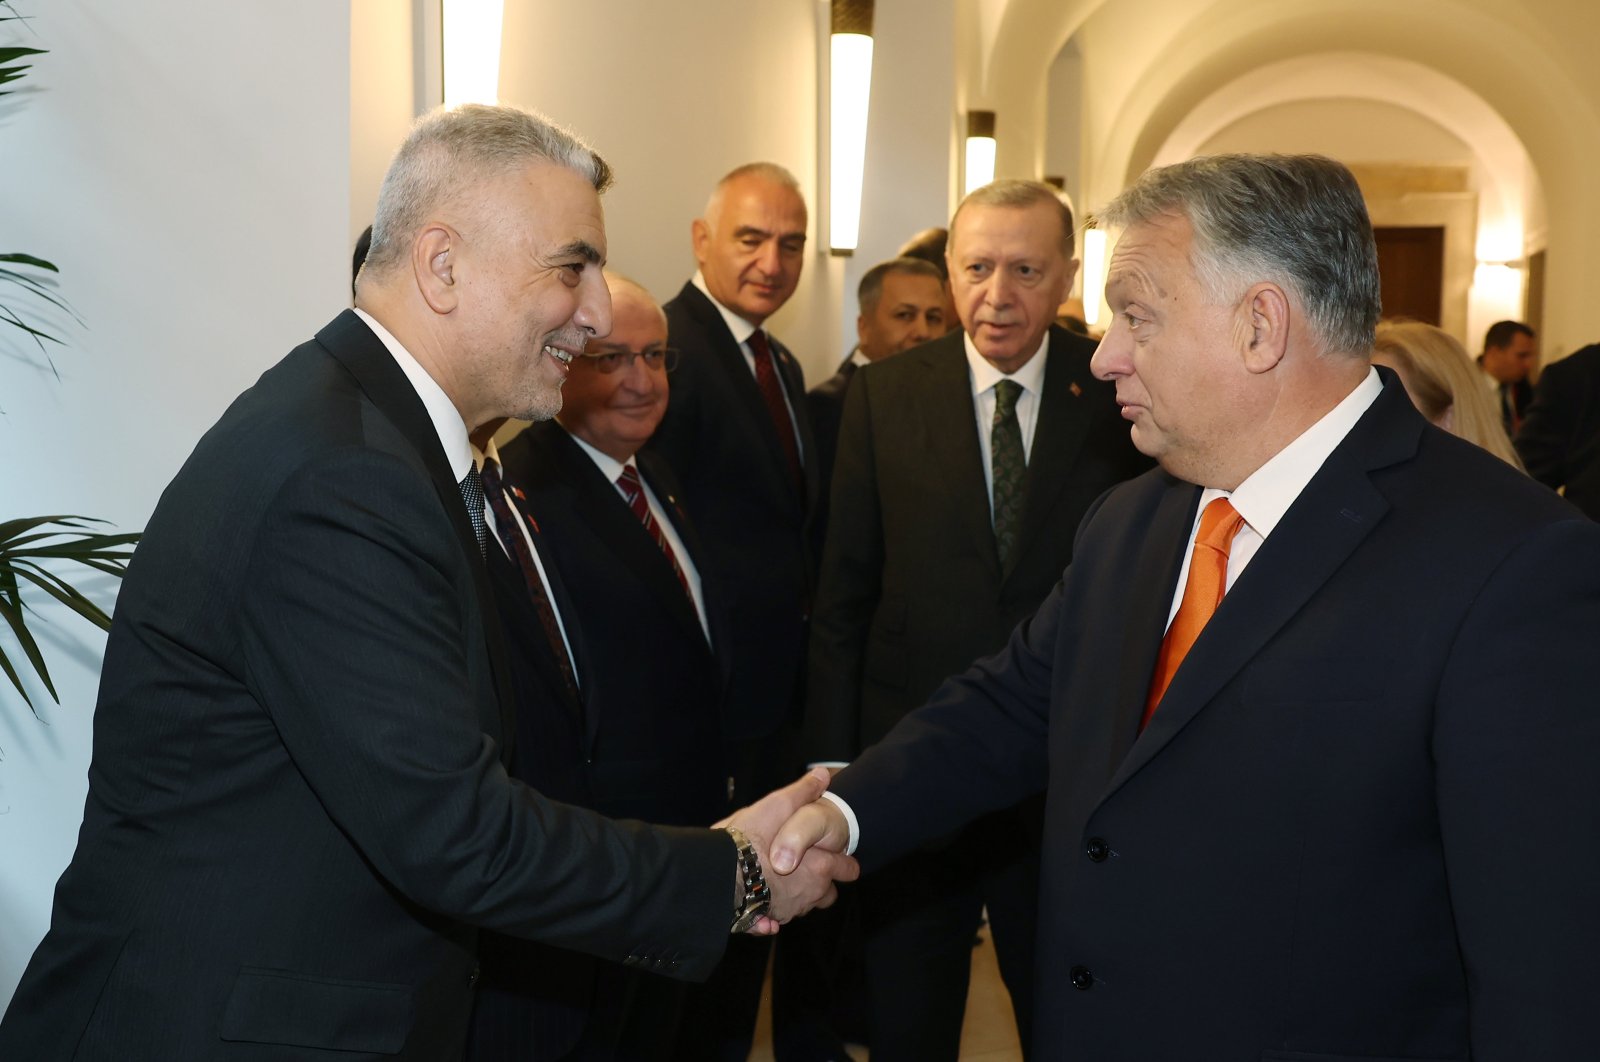 Türkiye, Hungary ink protocols on cooperation in trade, energy | Daily Sabah - Daily Sabah